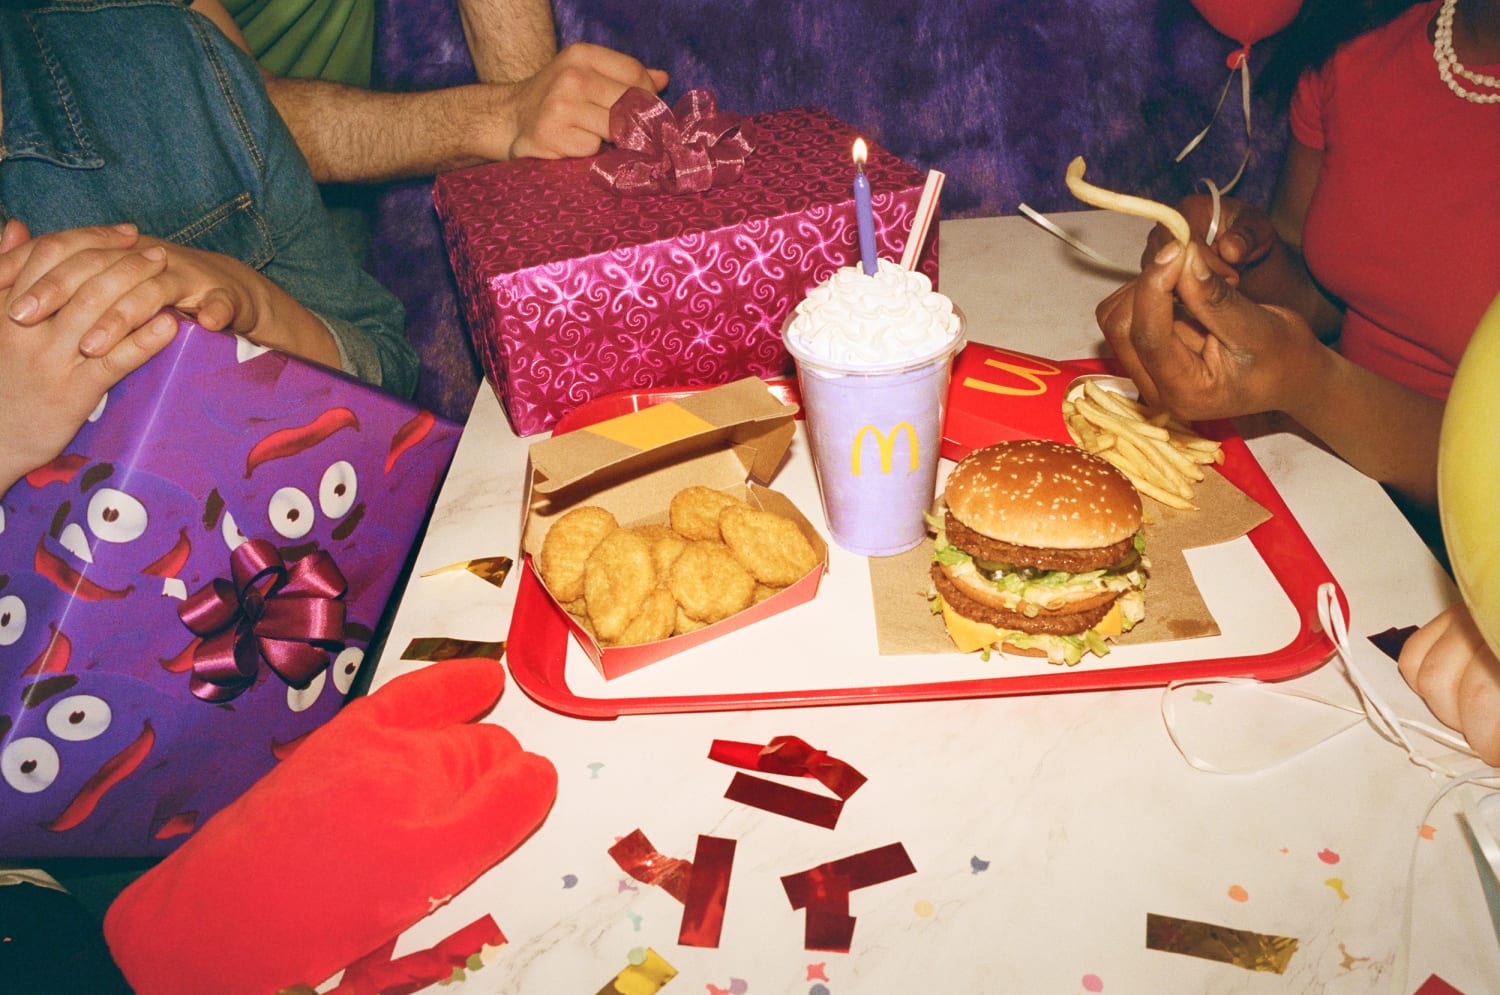 We Tried The Grimace Shake at McDonald's and…The Rumors Are True